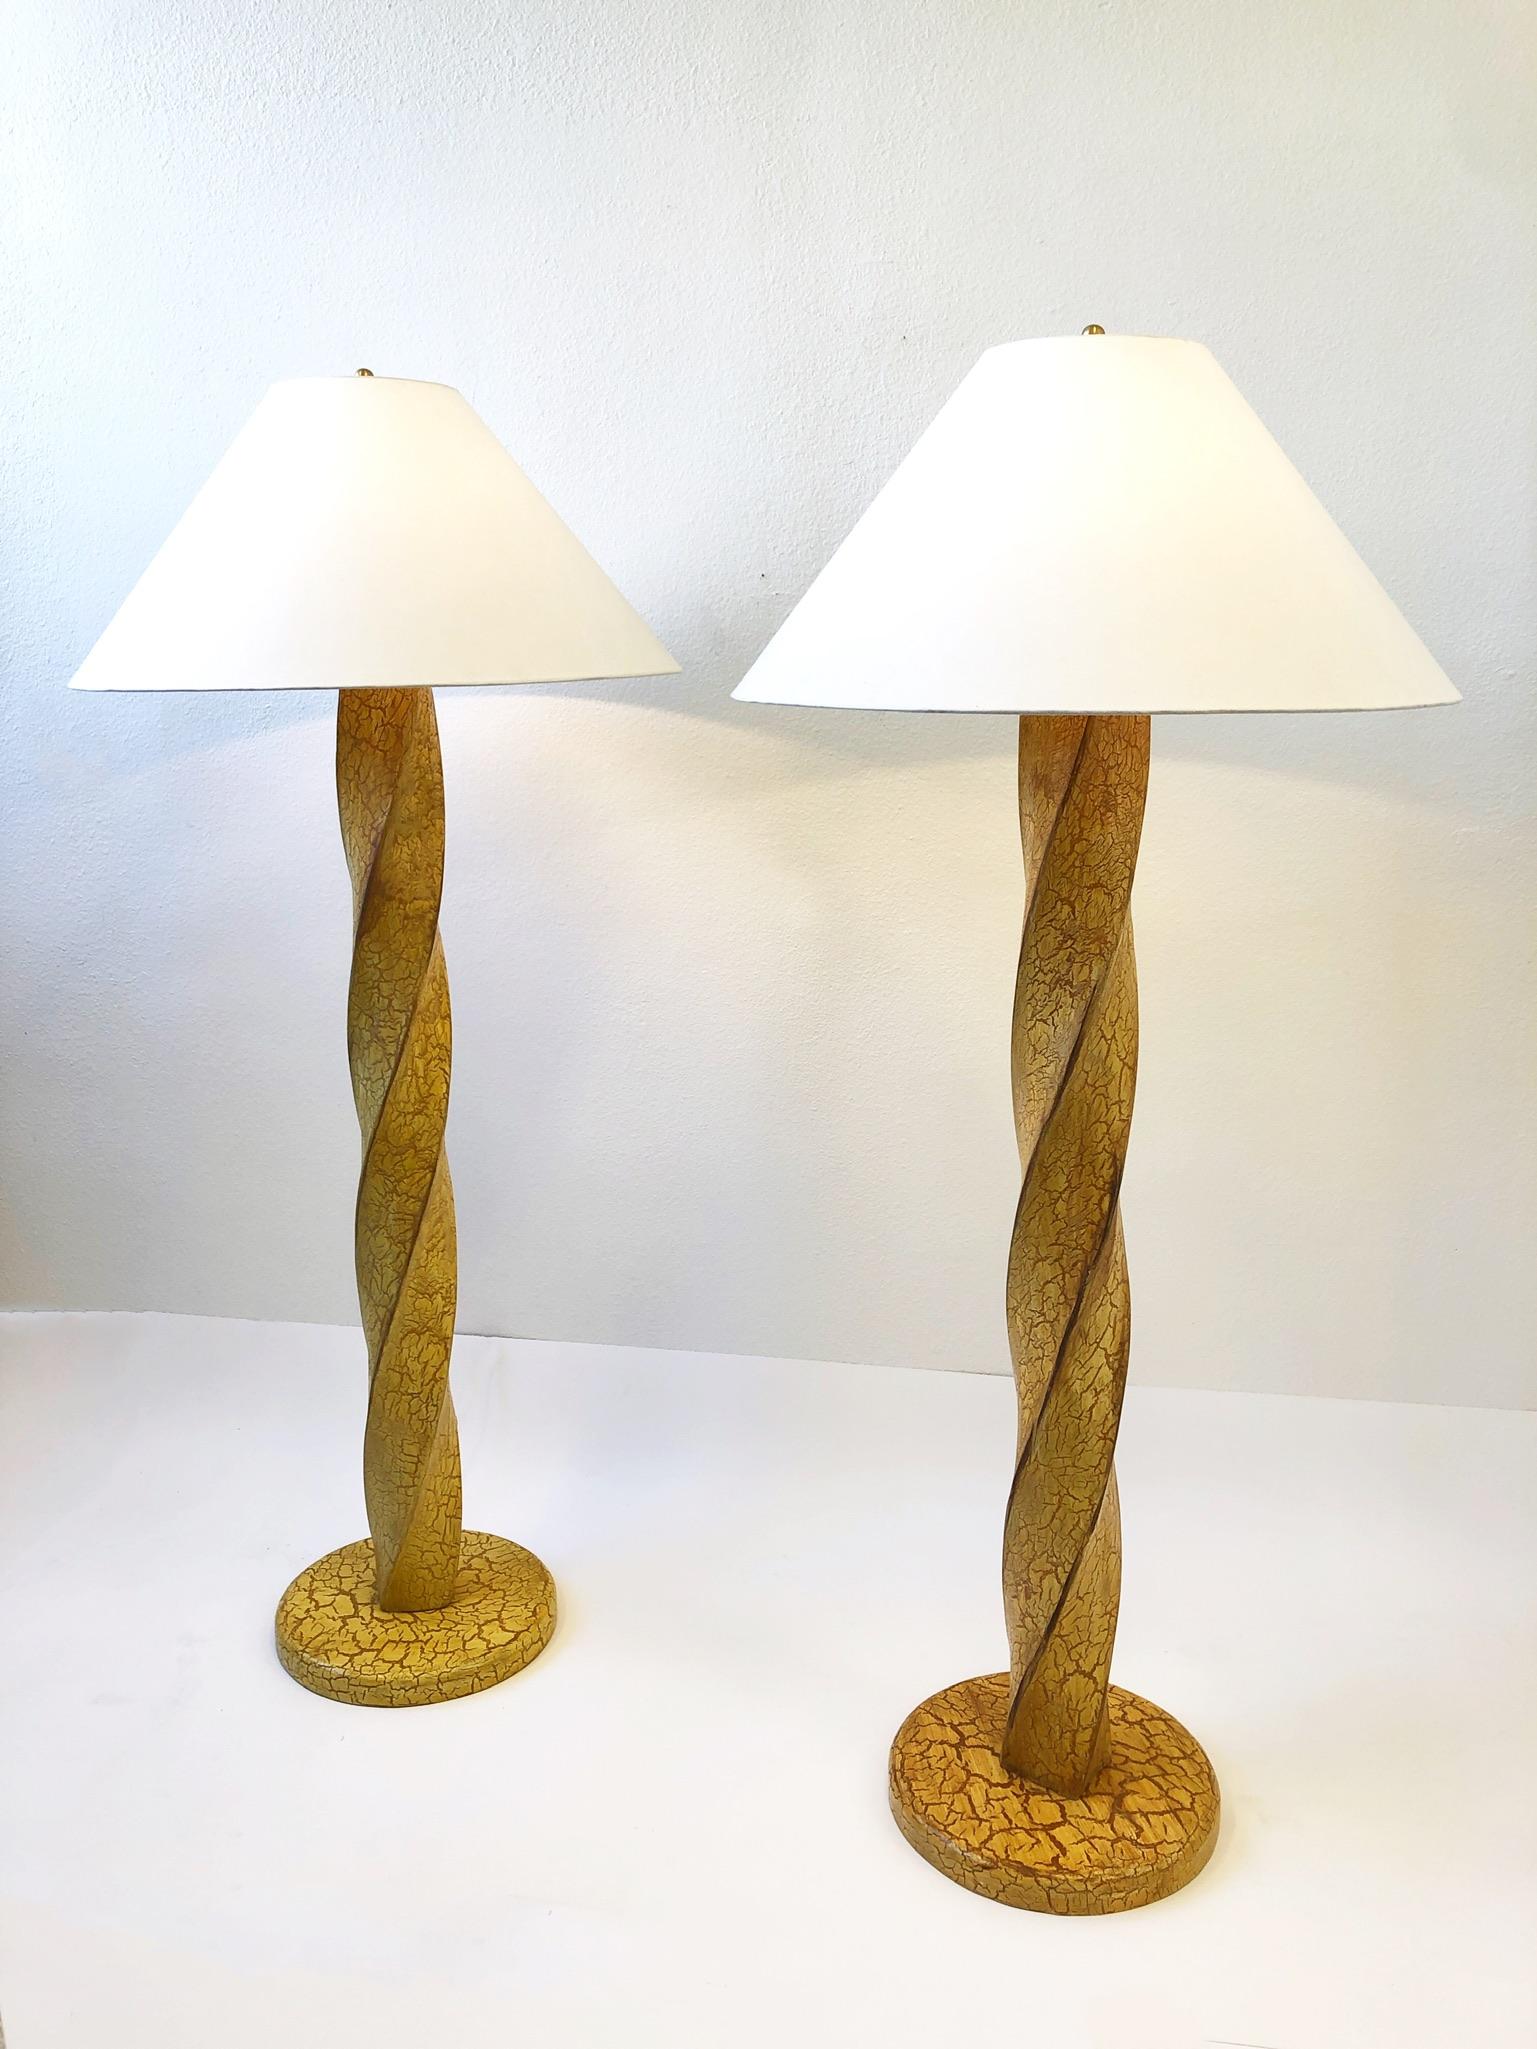 American Pair of Hand Carved Wood Floor Lamps by Dana Creath Designs for Steve Chase